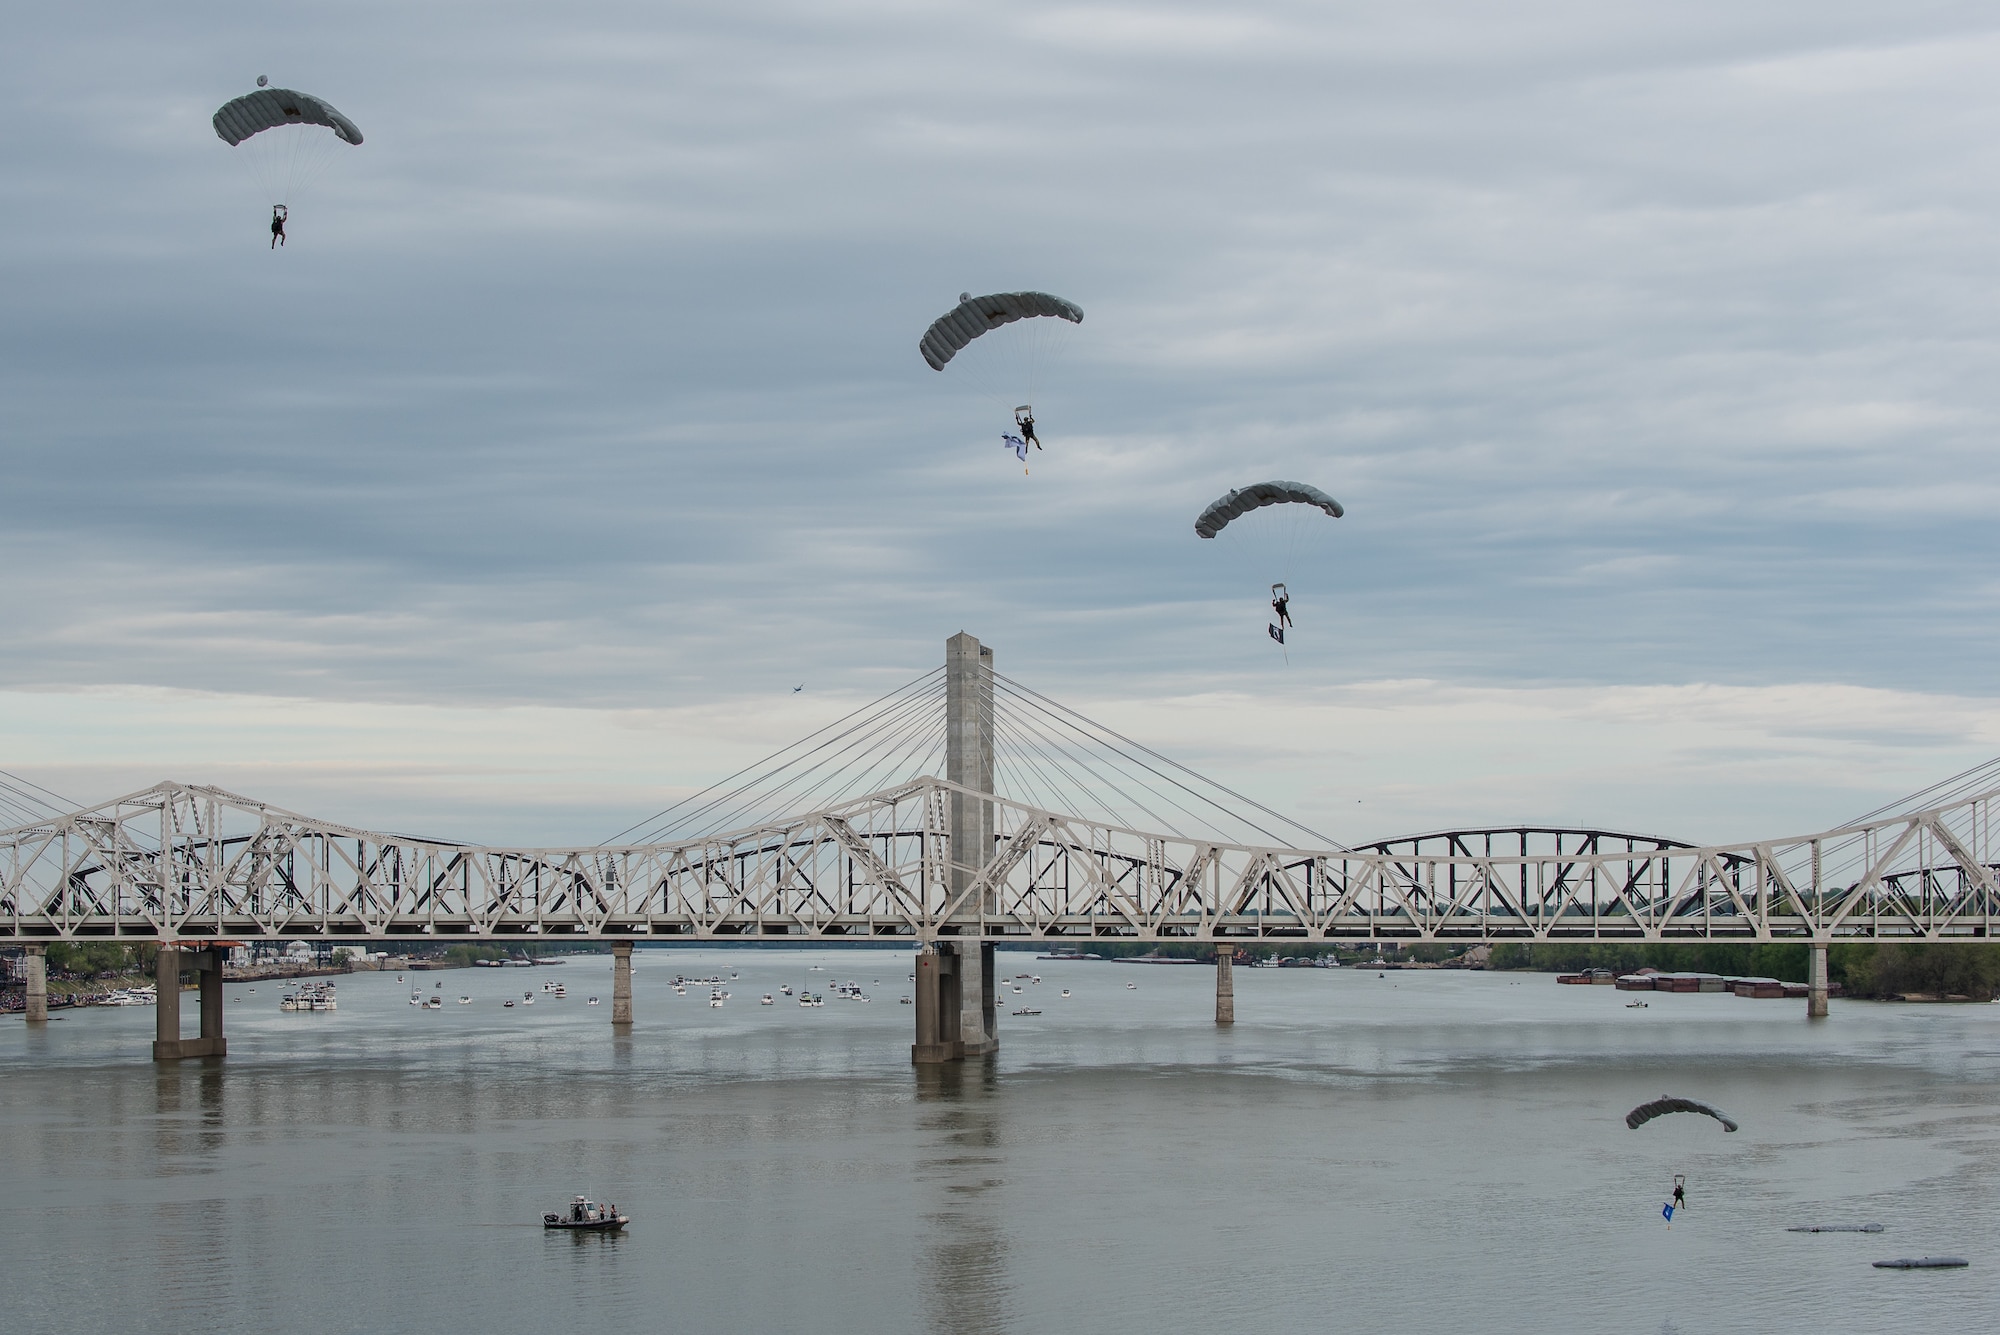 Special Operators from the Kentucky Air National Guard’s 123rd Special Tactics Squadron parachute into the Ohio River during the annual Thunder Over Louisville airshow in Louisville, Ky., April 13, 2019. Hundreds of thousands of spectators turned out to view the event, which has grown to become one of the largest single-day air shows in North America. (U.S. Air National Guard photo by Dale Greer)